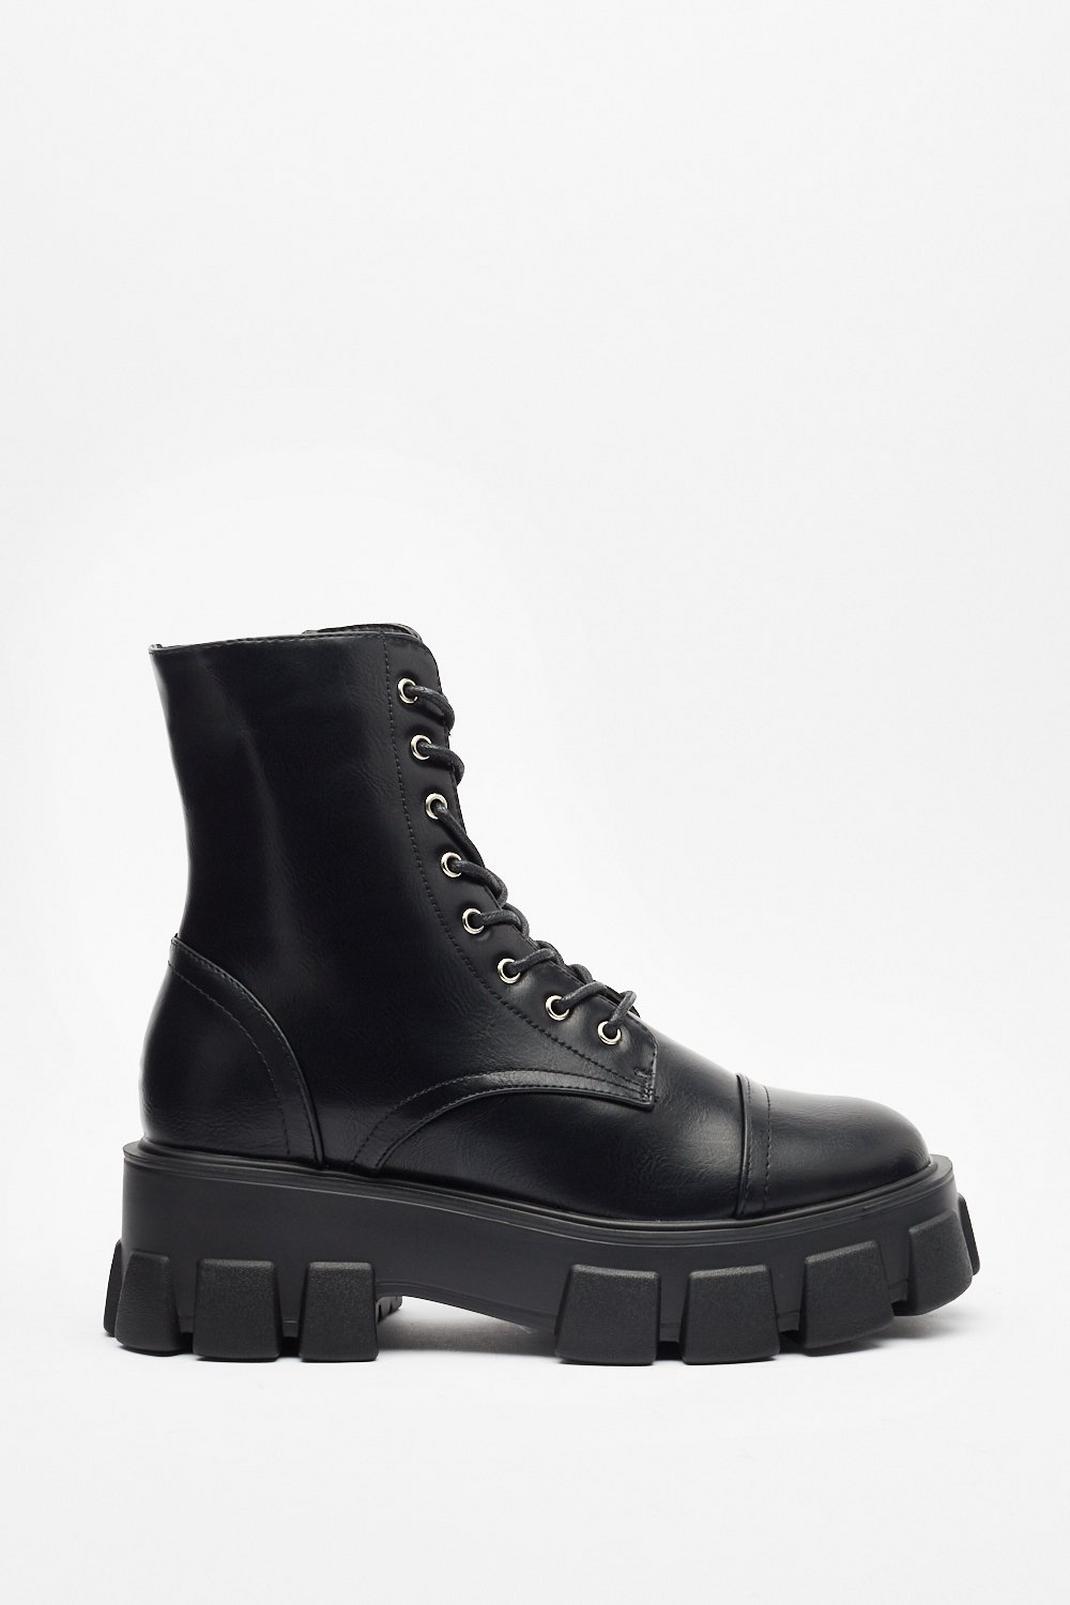 105 Cleated Chunky Biker Boots image number 2